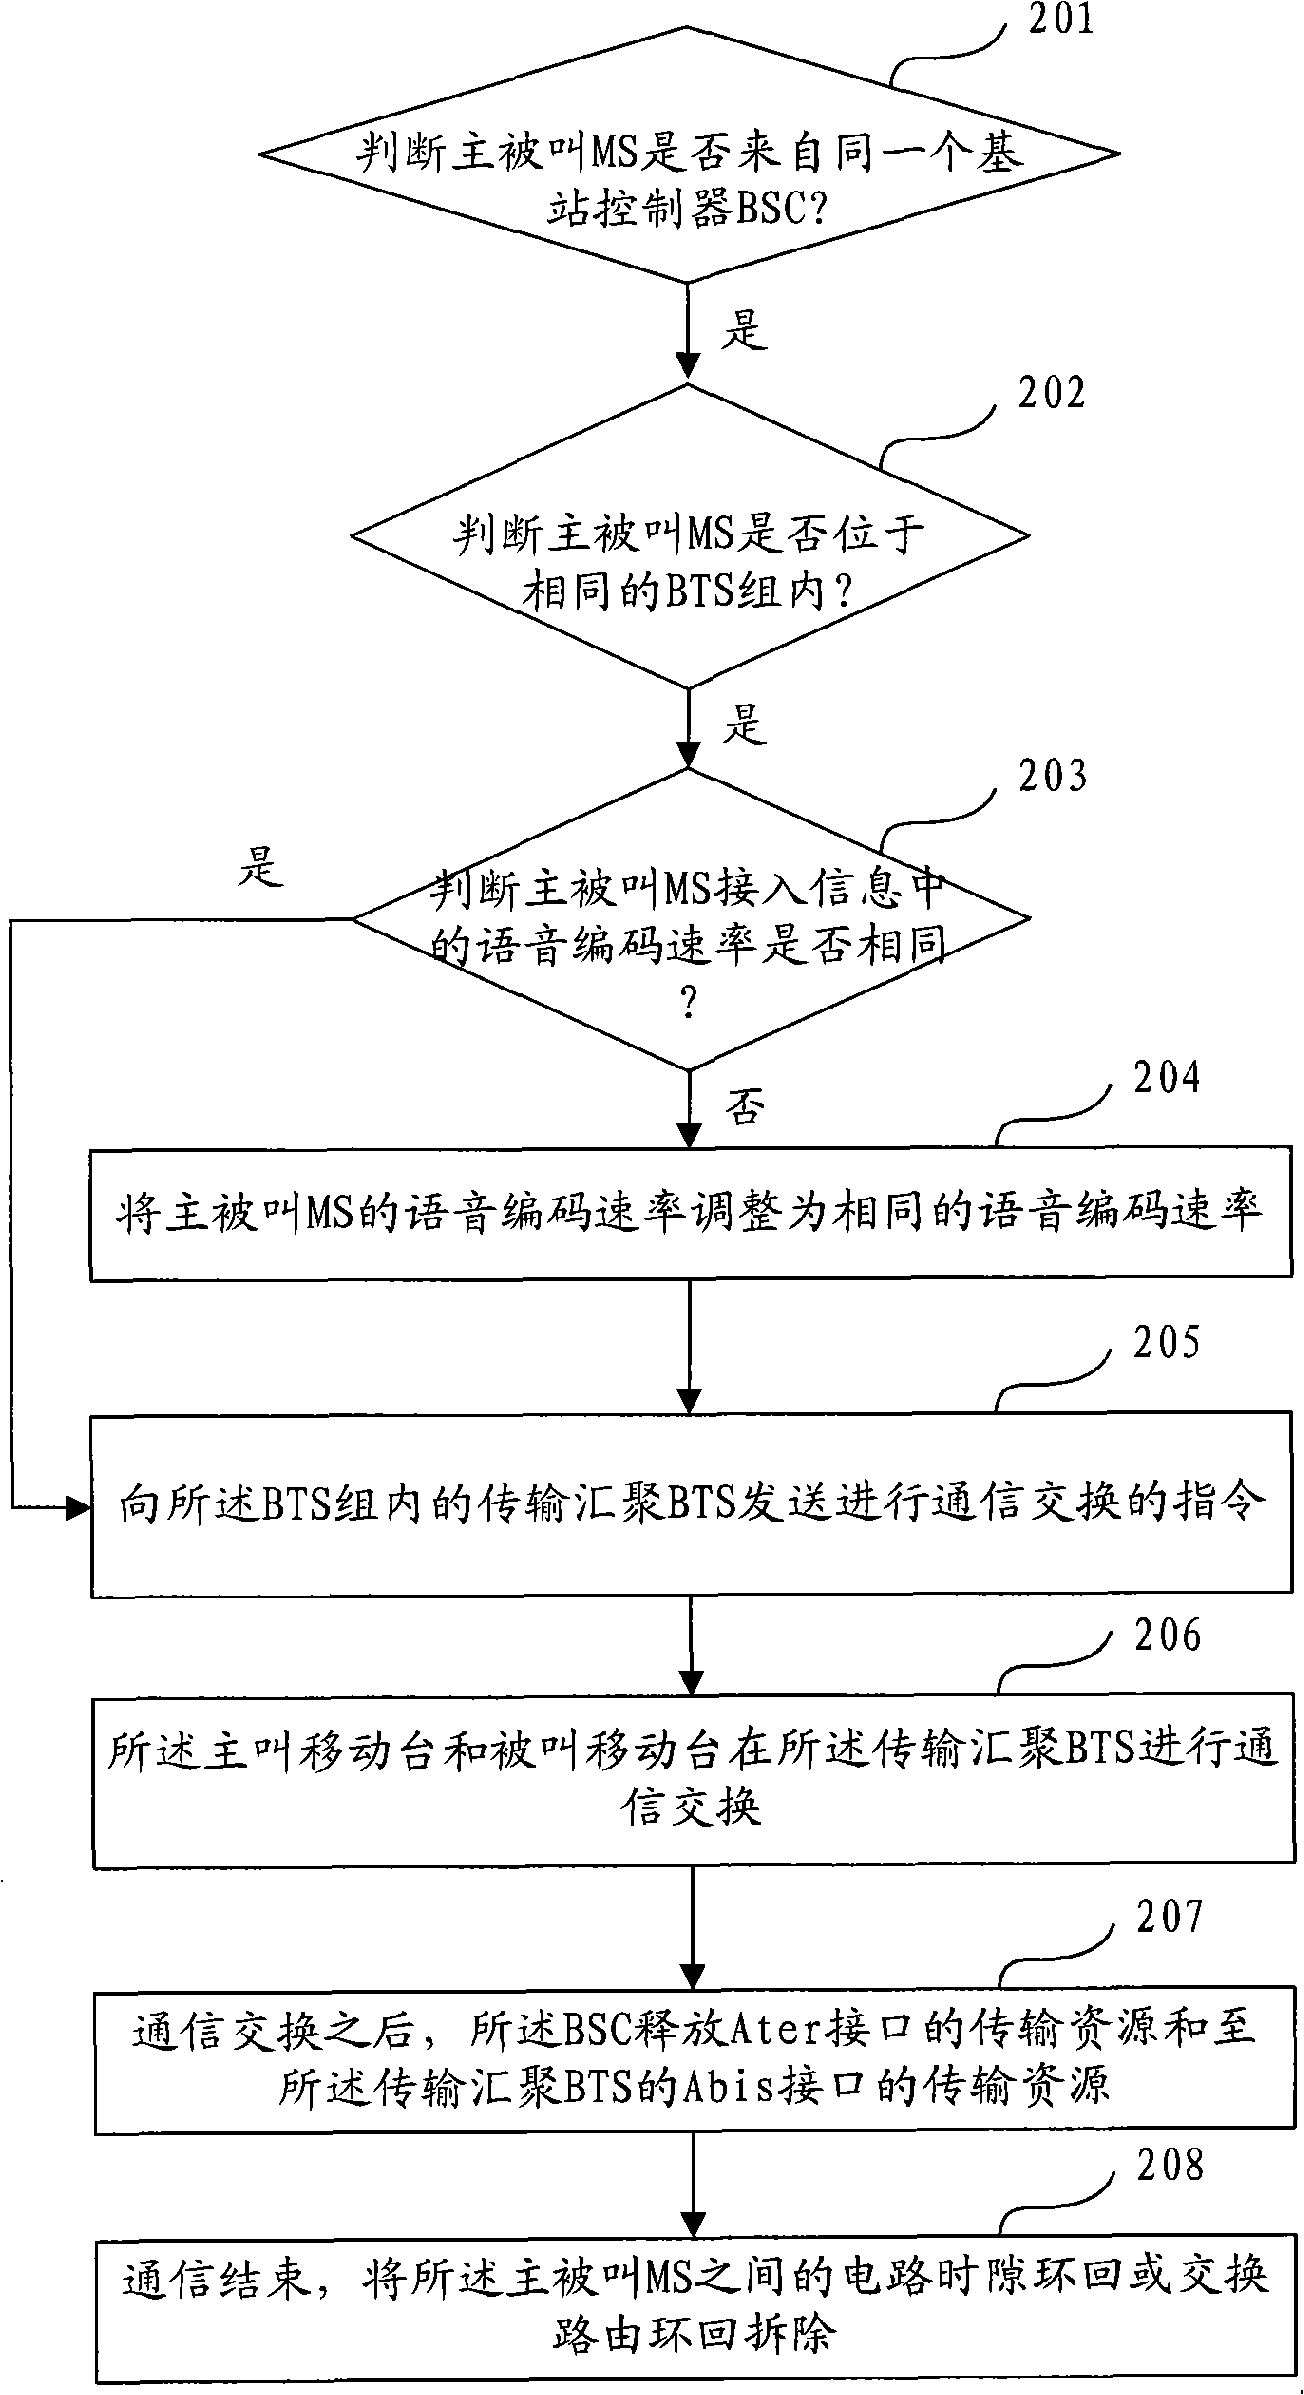 Method for communication exchange in message receiving and sending station of base station, and subsystem of base station